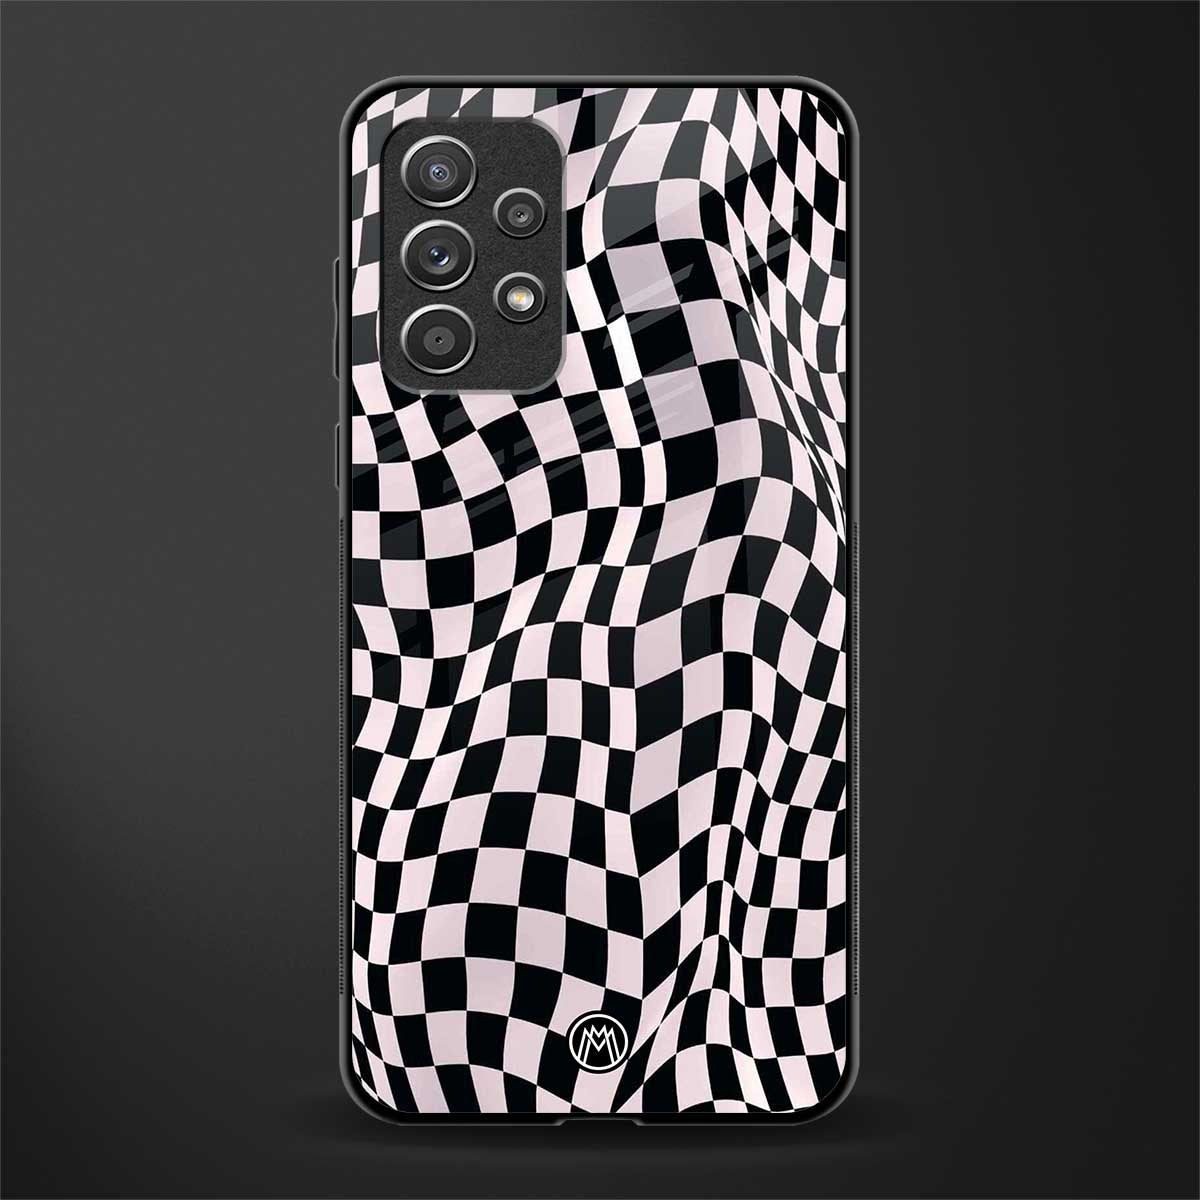 trippy b&w check pattern glass case for samsung galaxy a52s 5g image